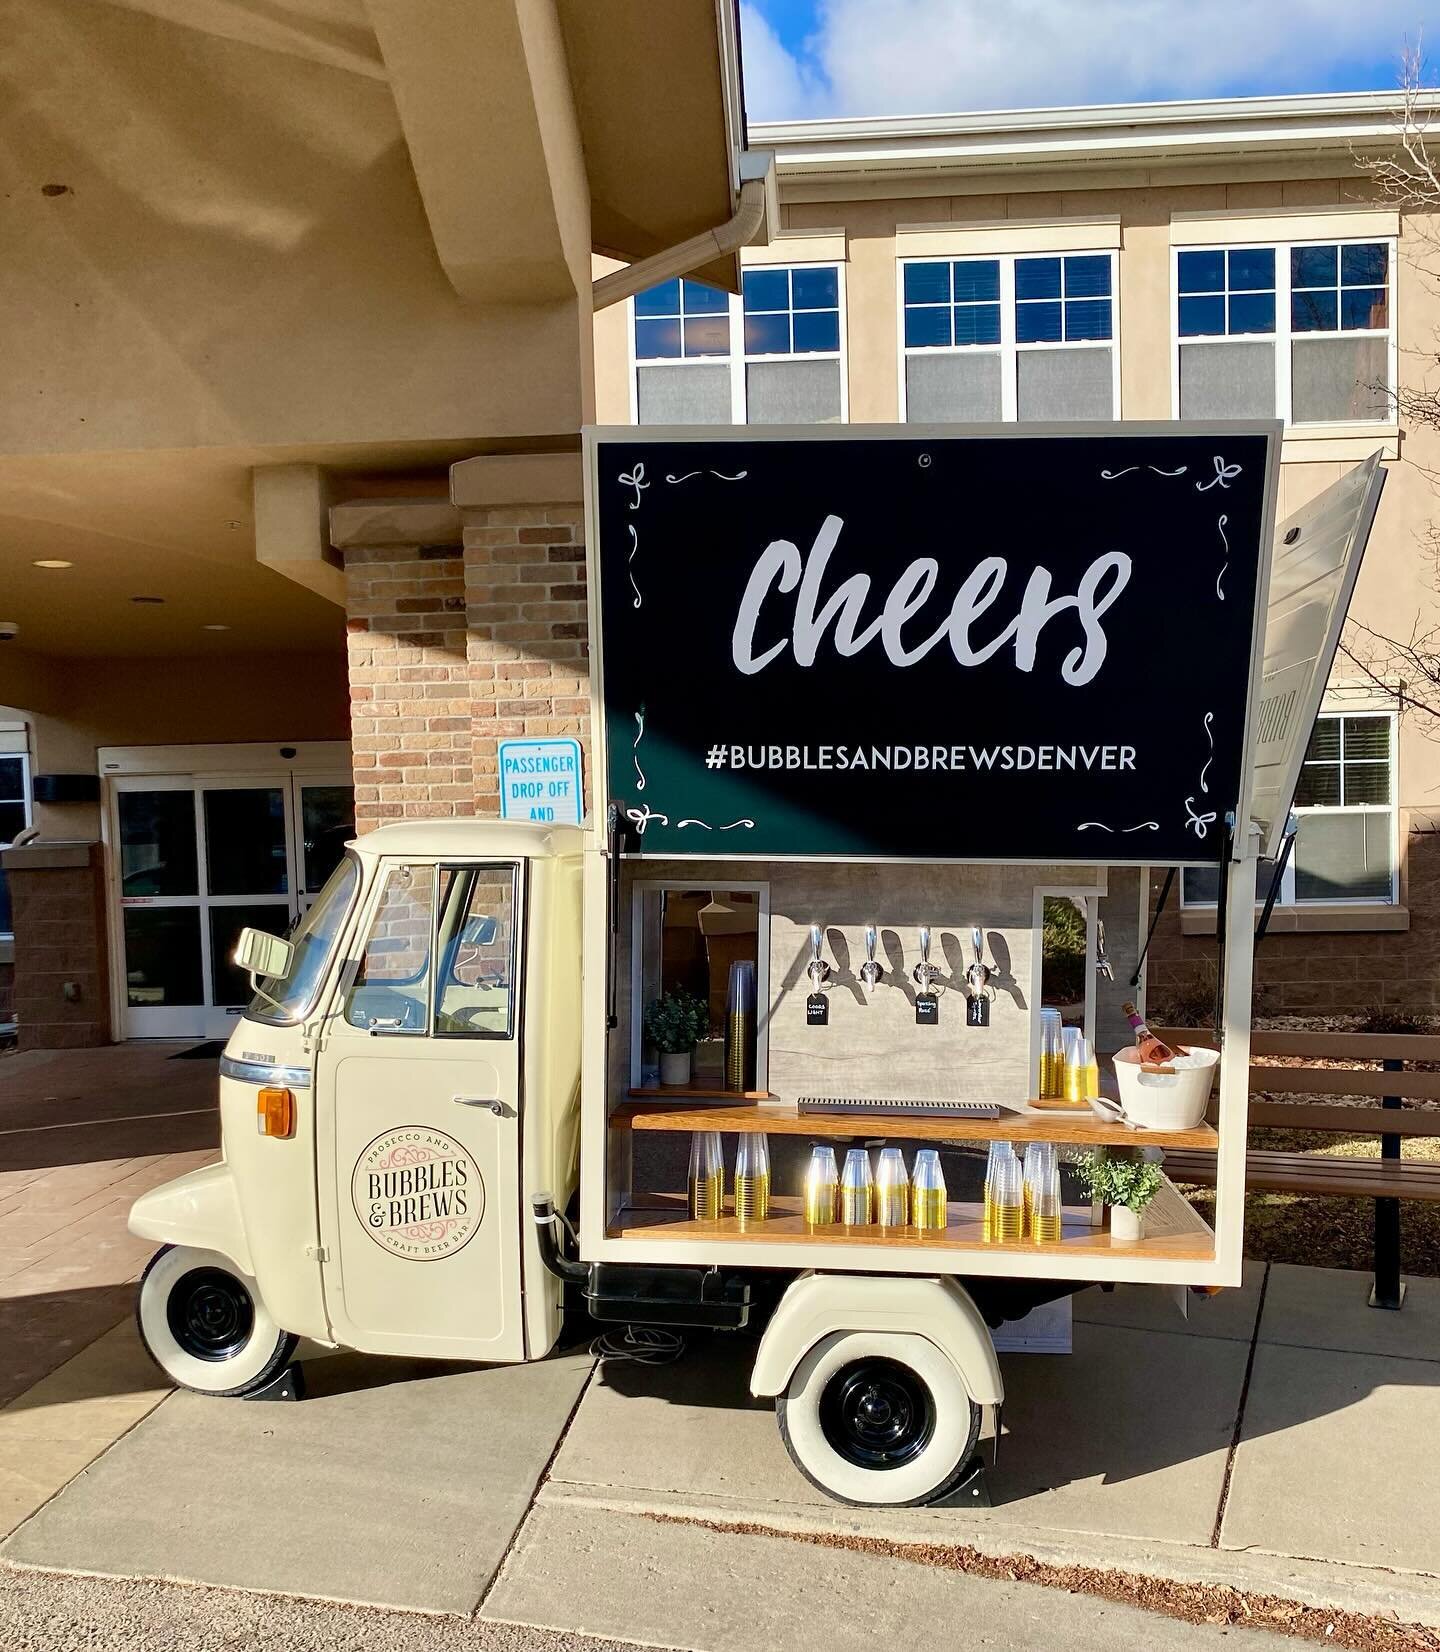 Who else loves being able to spontaneously attend last minute events?! 🎉 We&rsquo;re always down to bring the party with our cute little party truck serving up special drinks. Because let&rsquo;s be real, no event should be without a little extra fu